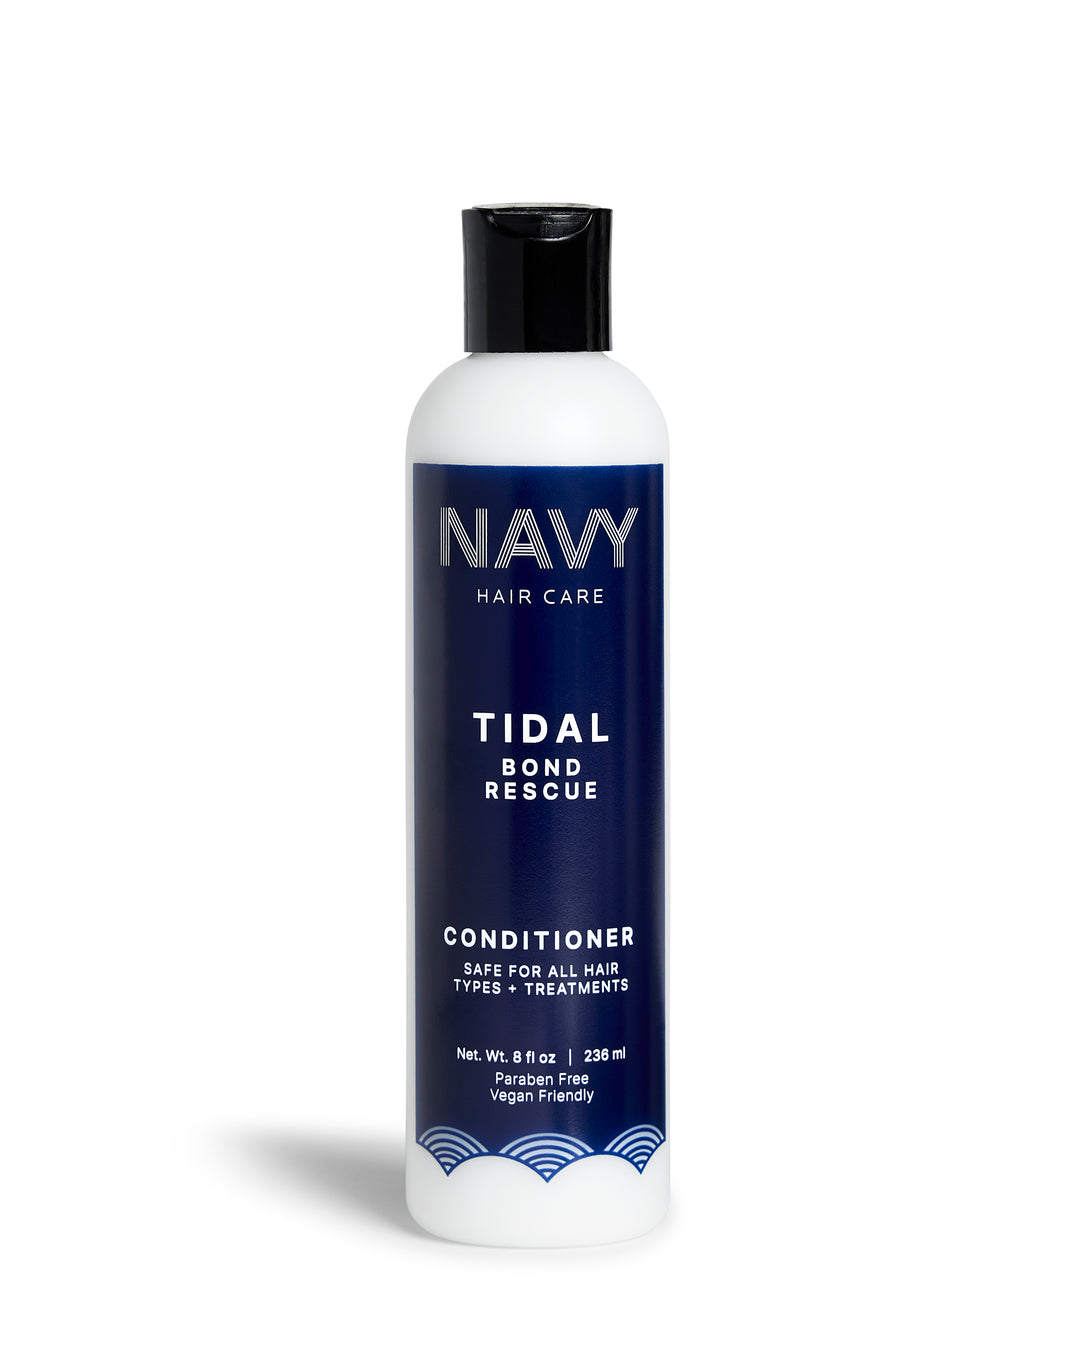 Navy Hair Care 40% OFF - Beauty Deals BFF